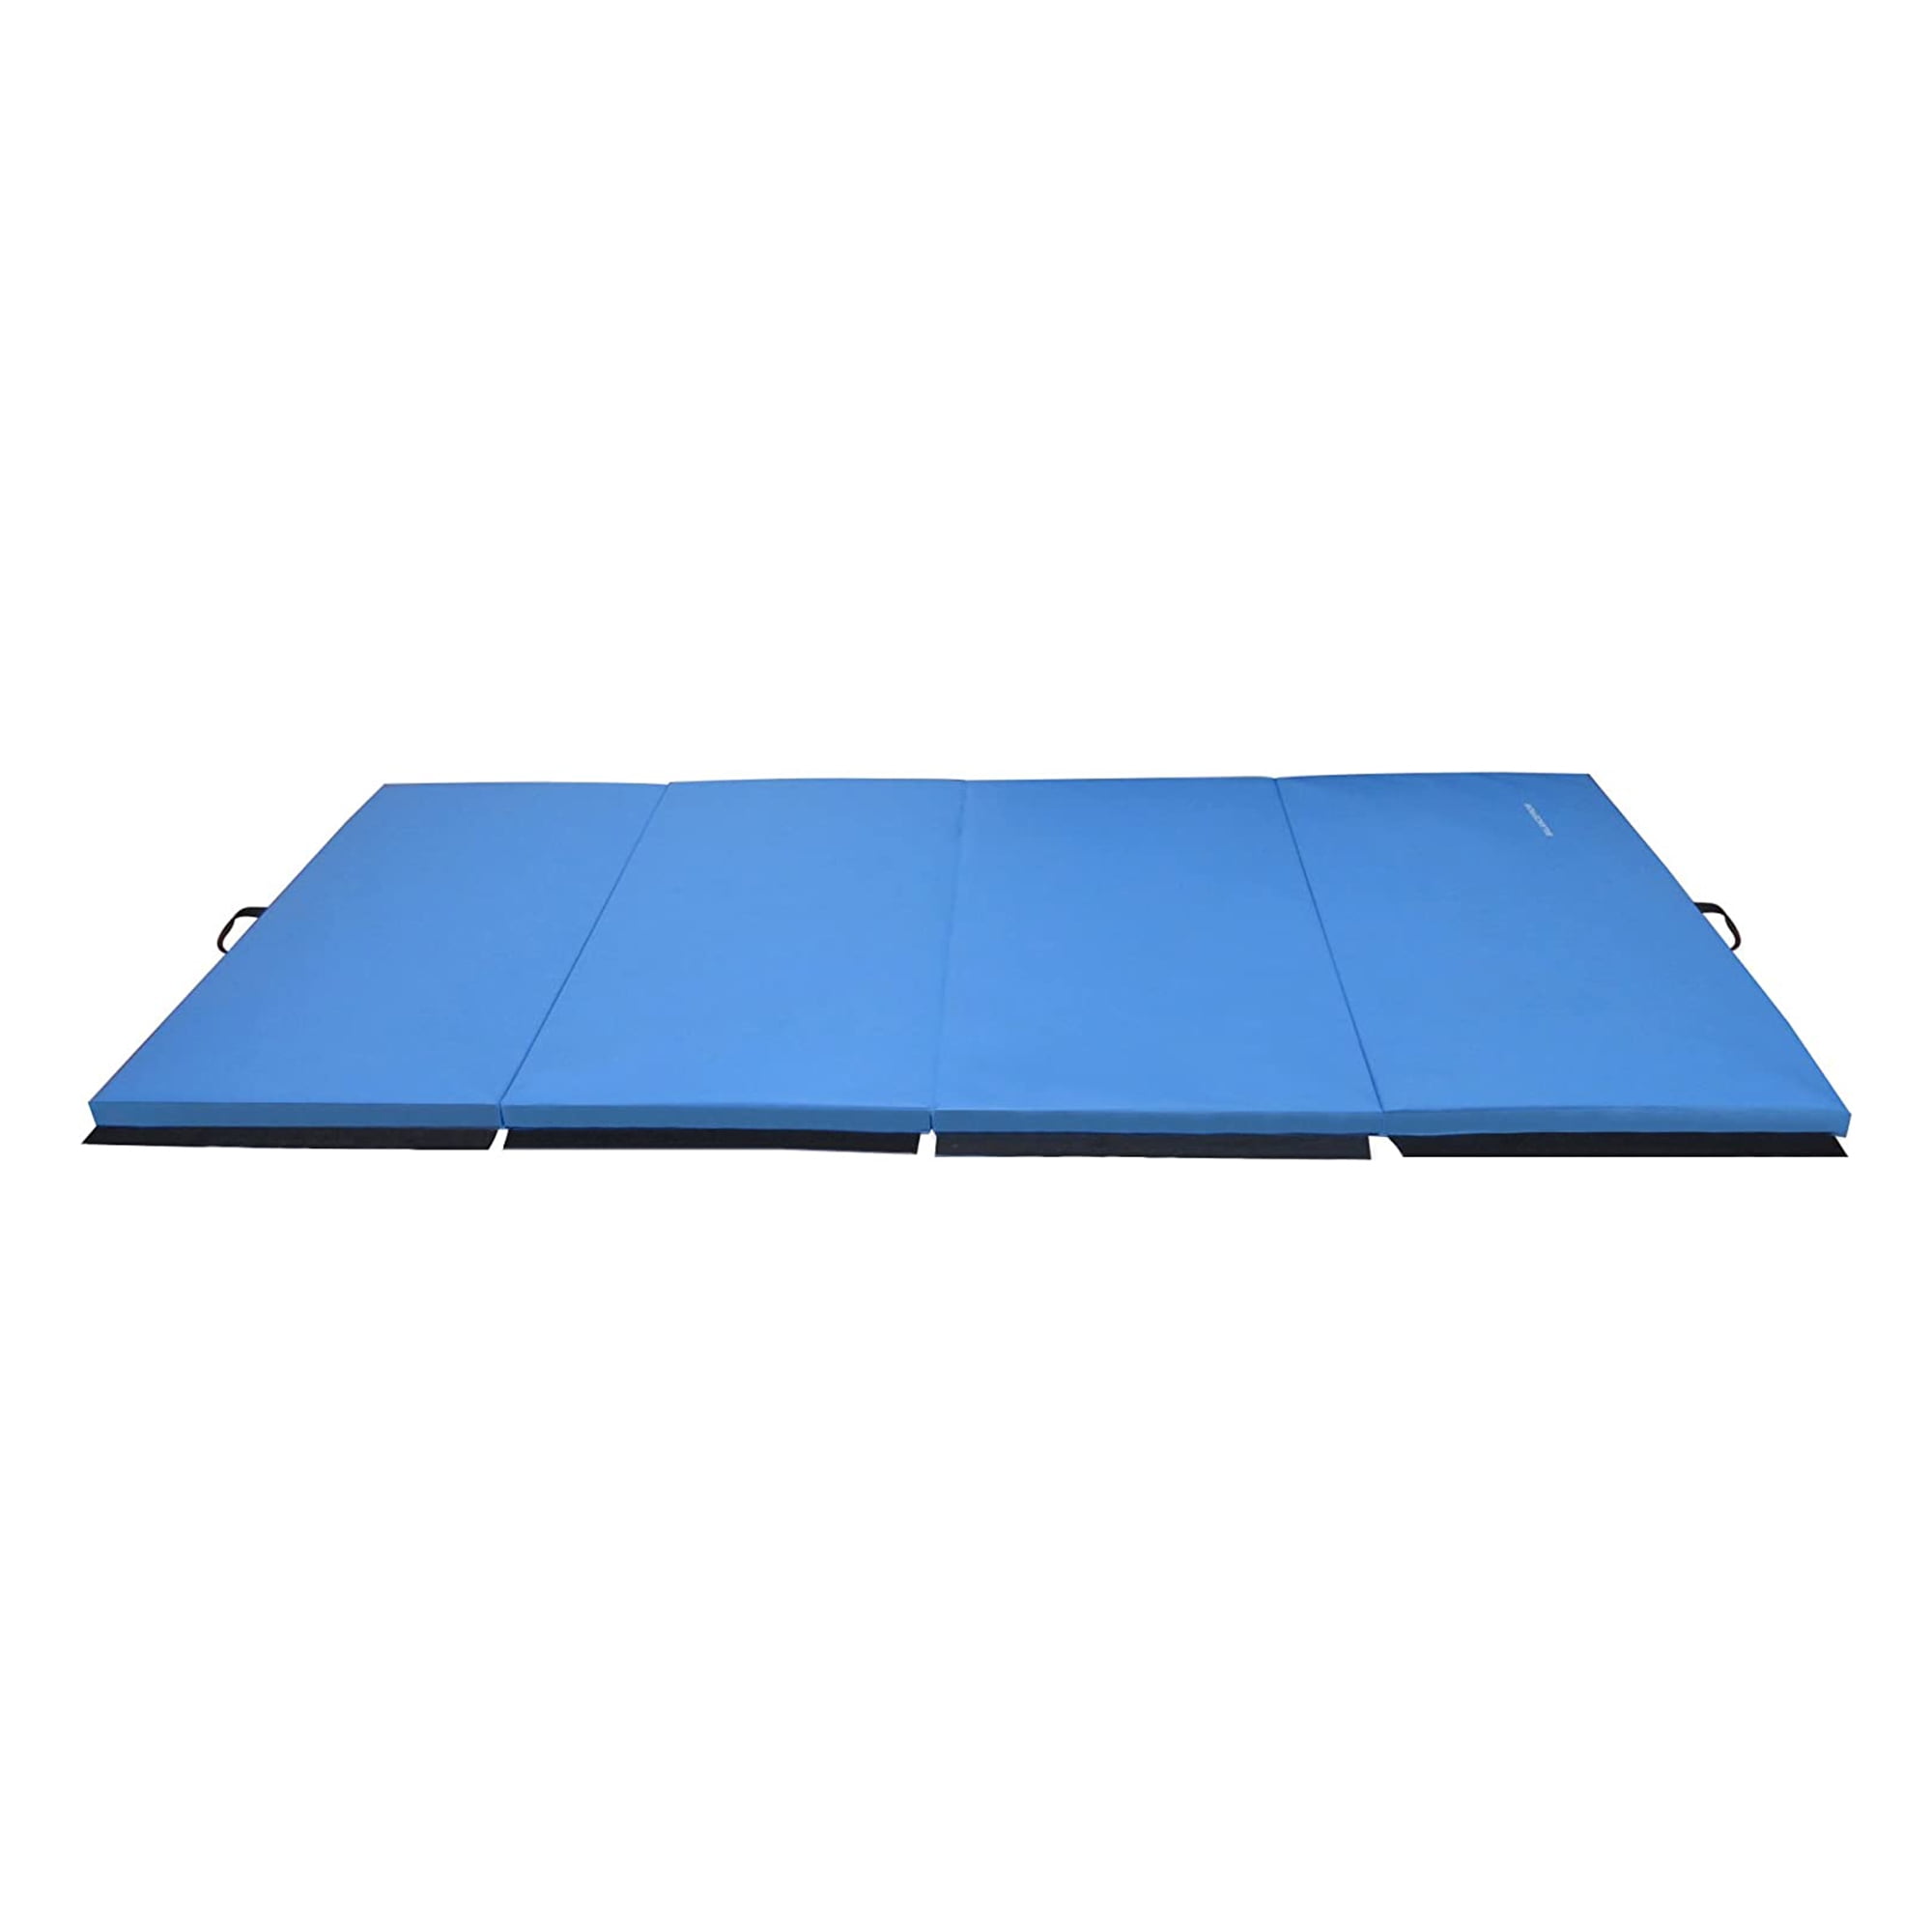 BalanceFrom Fitness 120 by 48 Inch Folding All Purpose Gymnastic Mat, Blue  